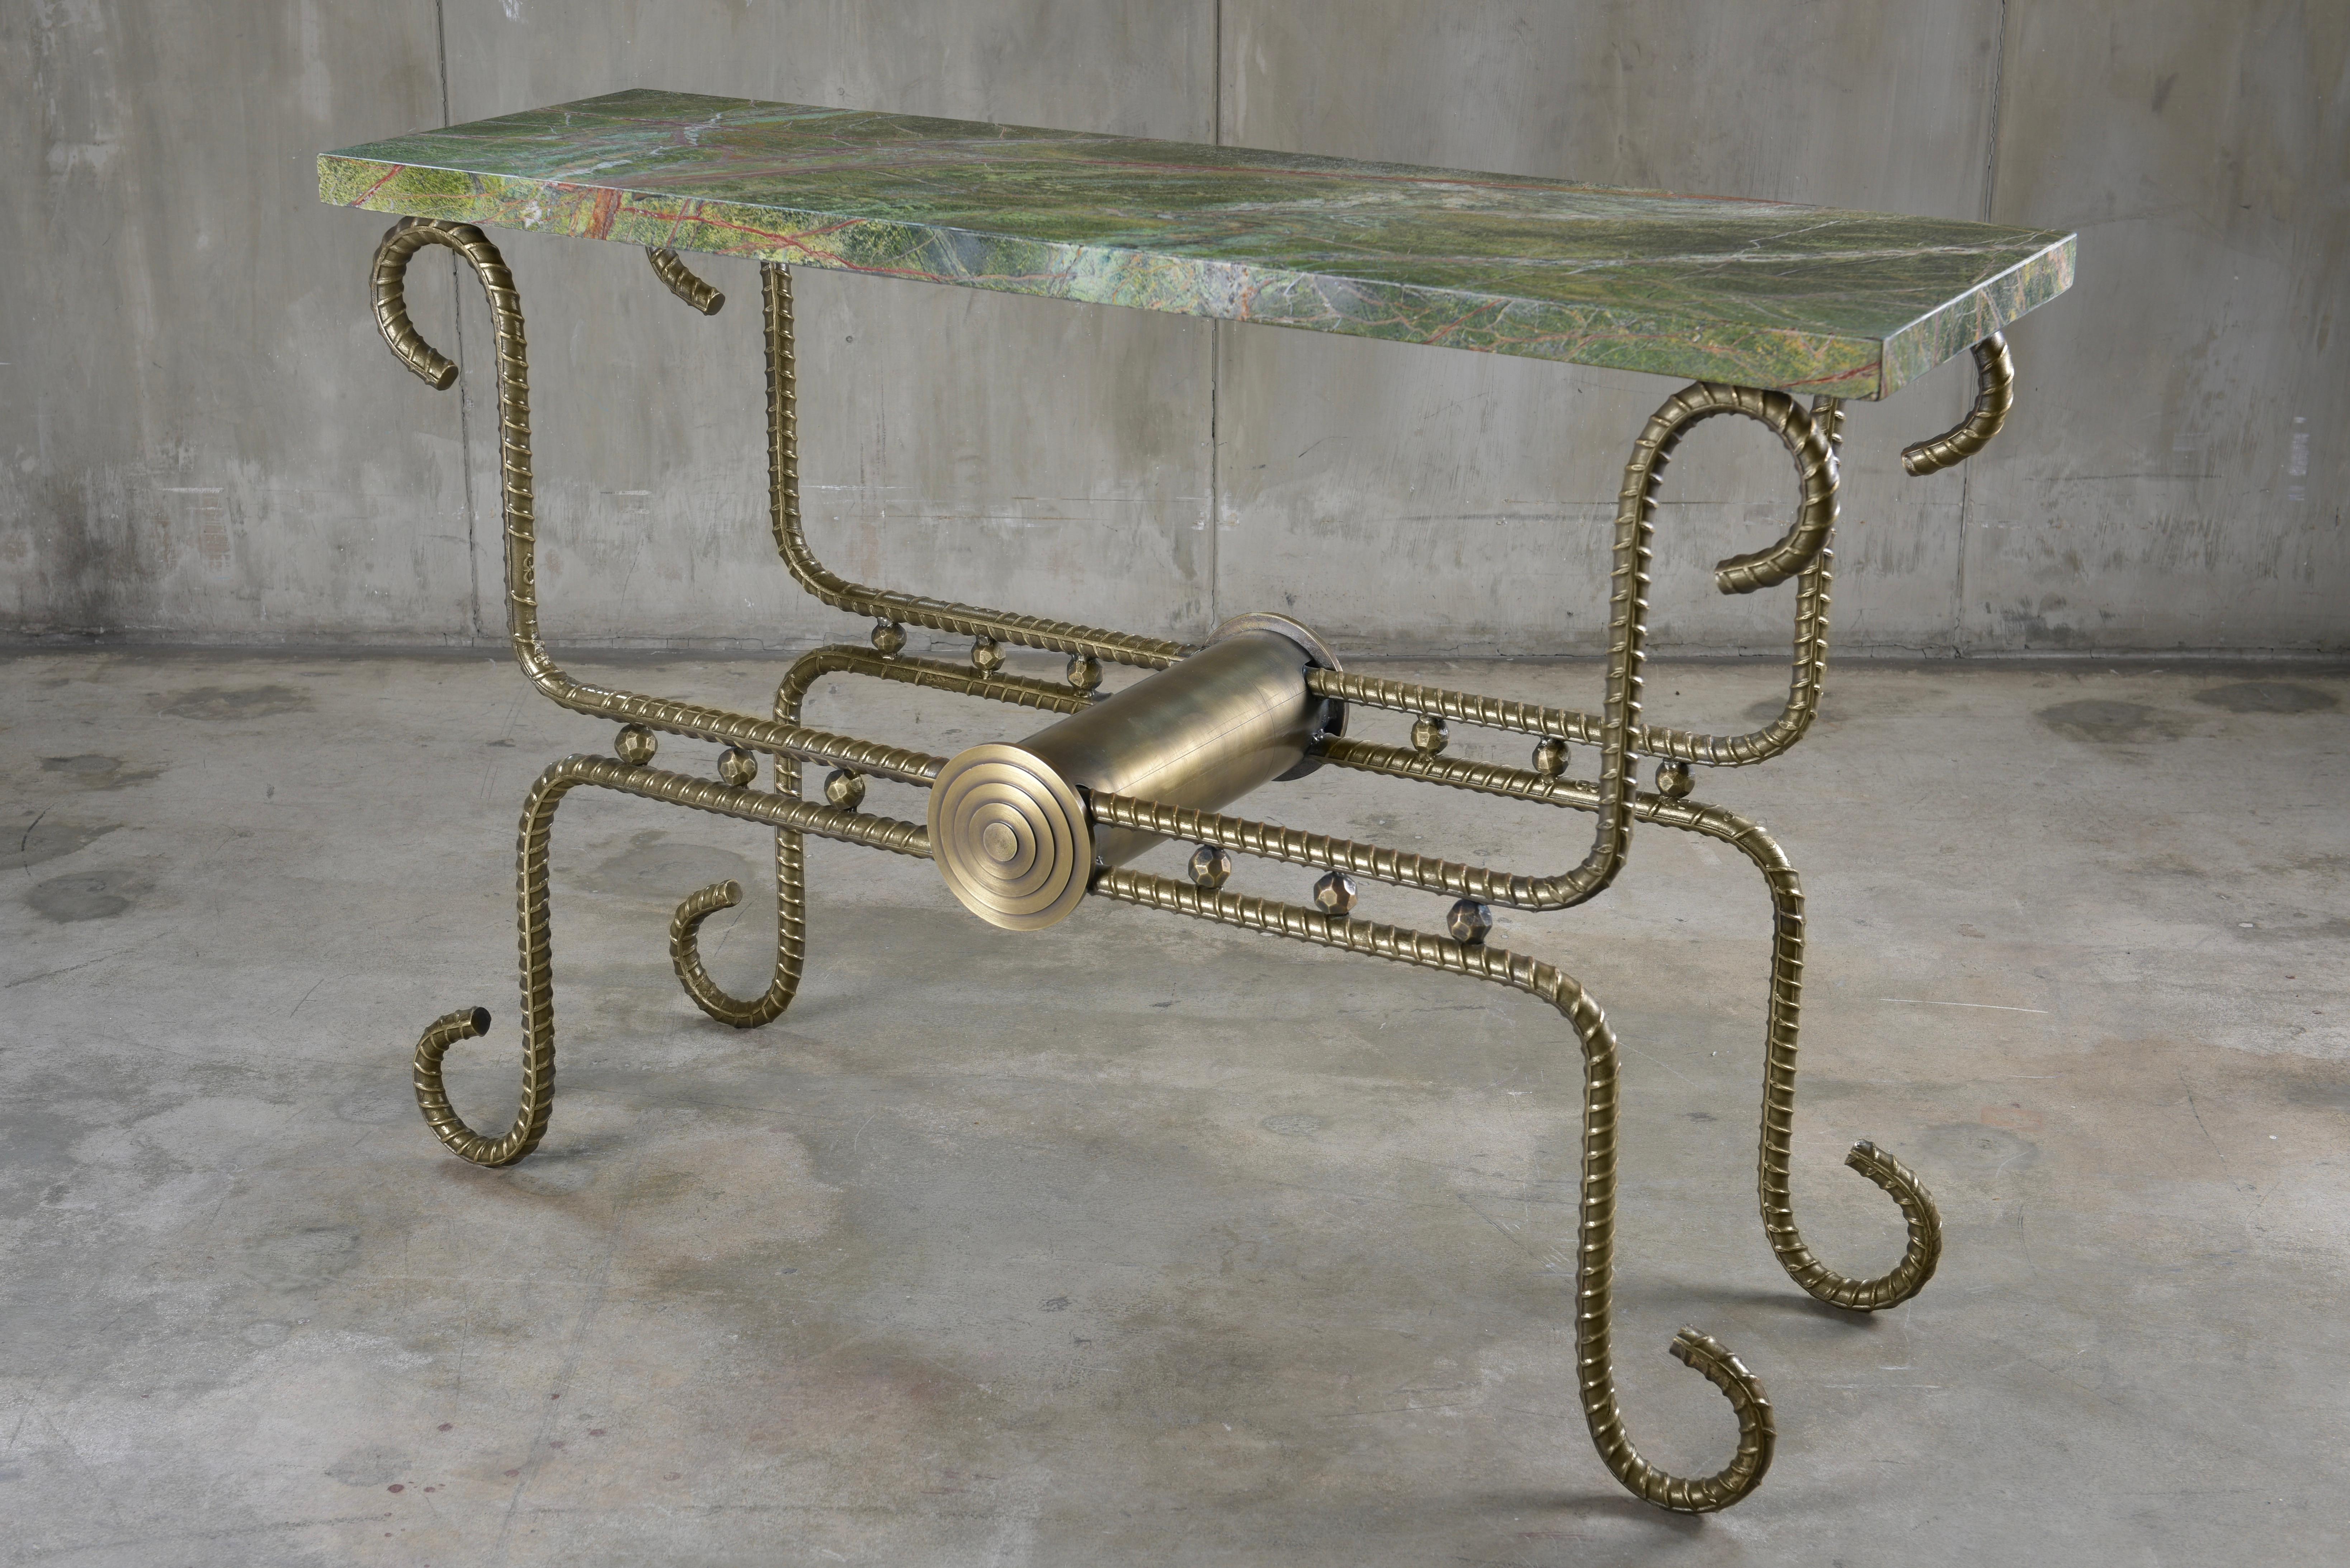 Other Antique Brass Console With Marble Top Functional Art Collectible Design For Sale